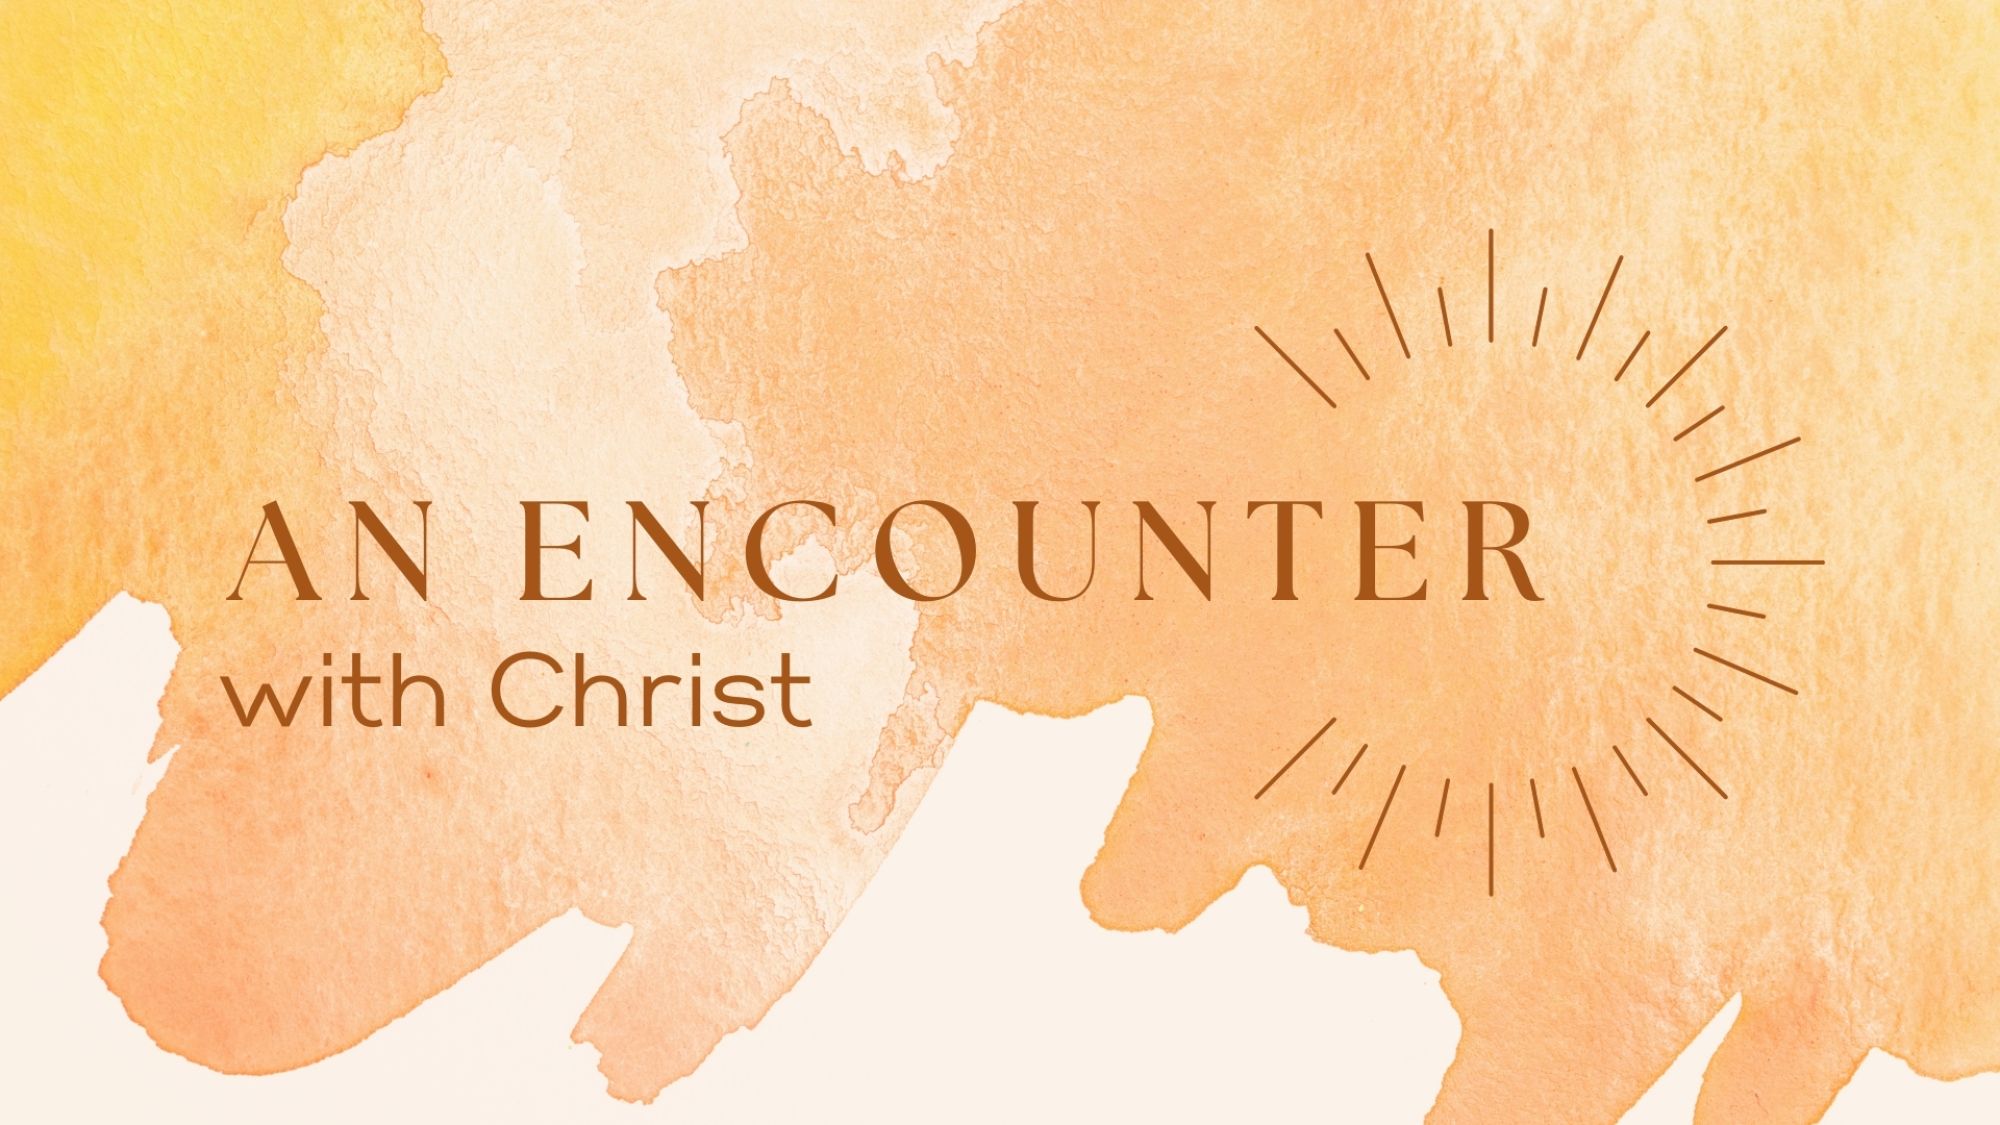 1 An Encounter with Christ